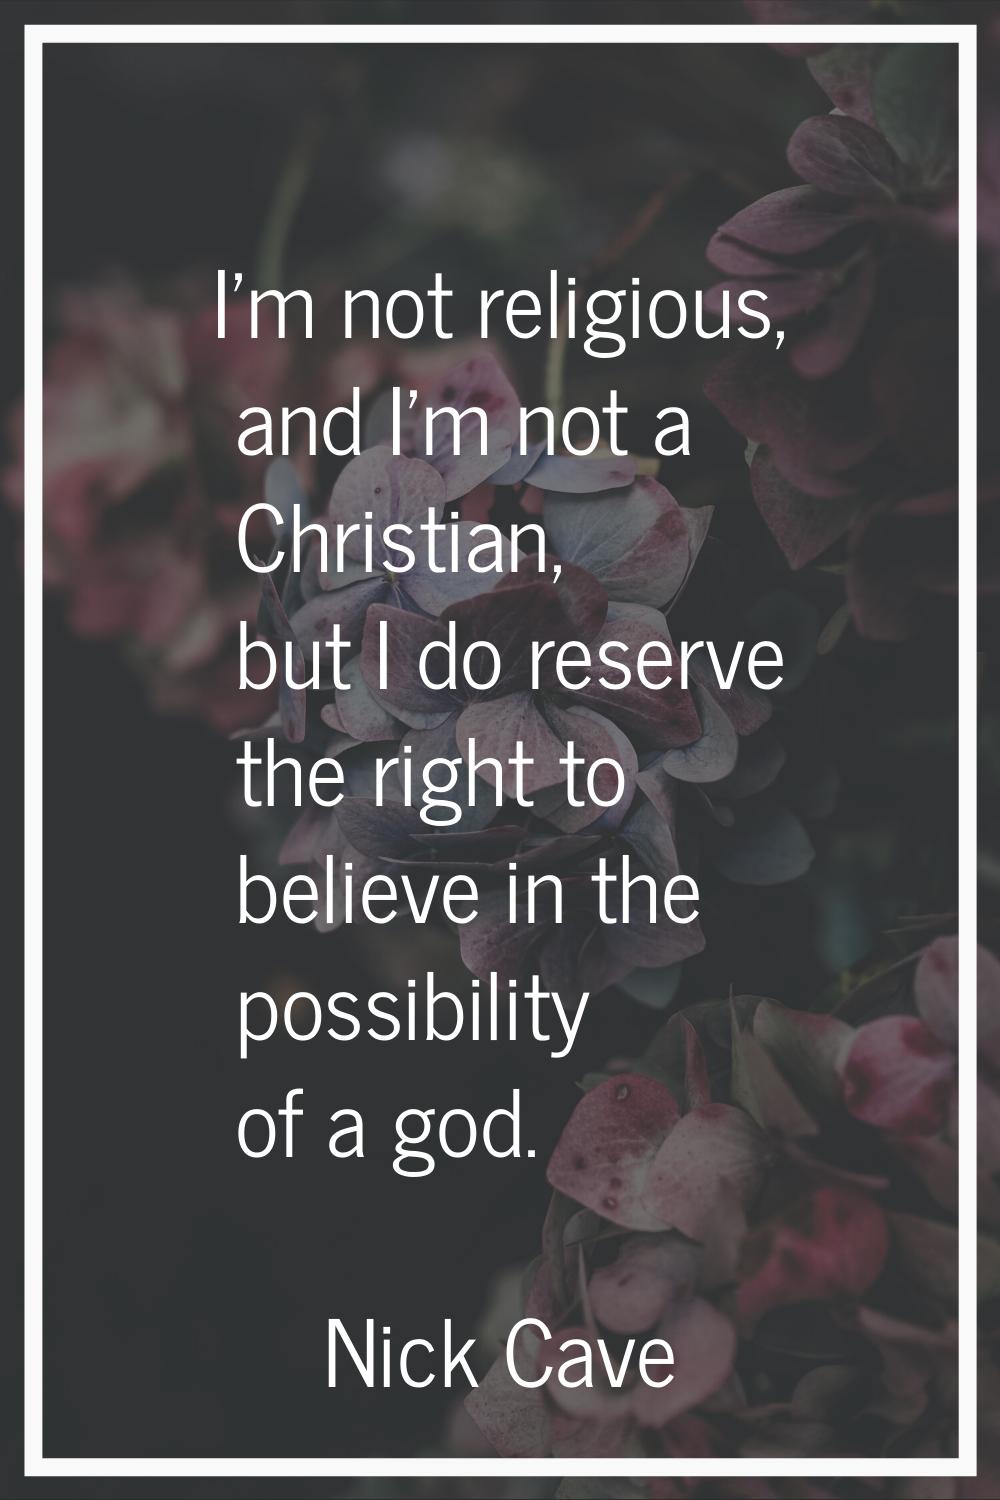 I'm not religious, and I'm not a Christian, but I do reserve the right to believe in the possibilit